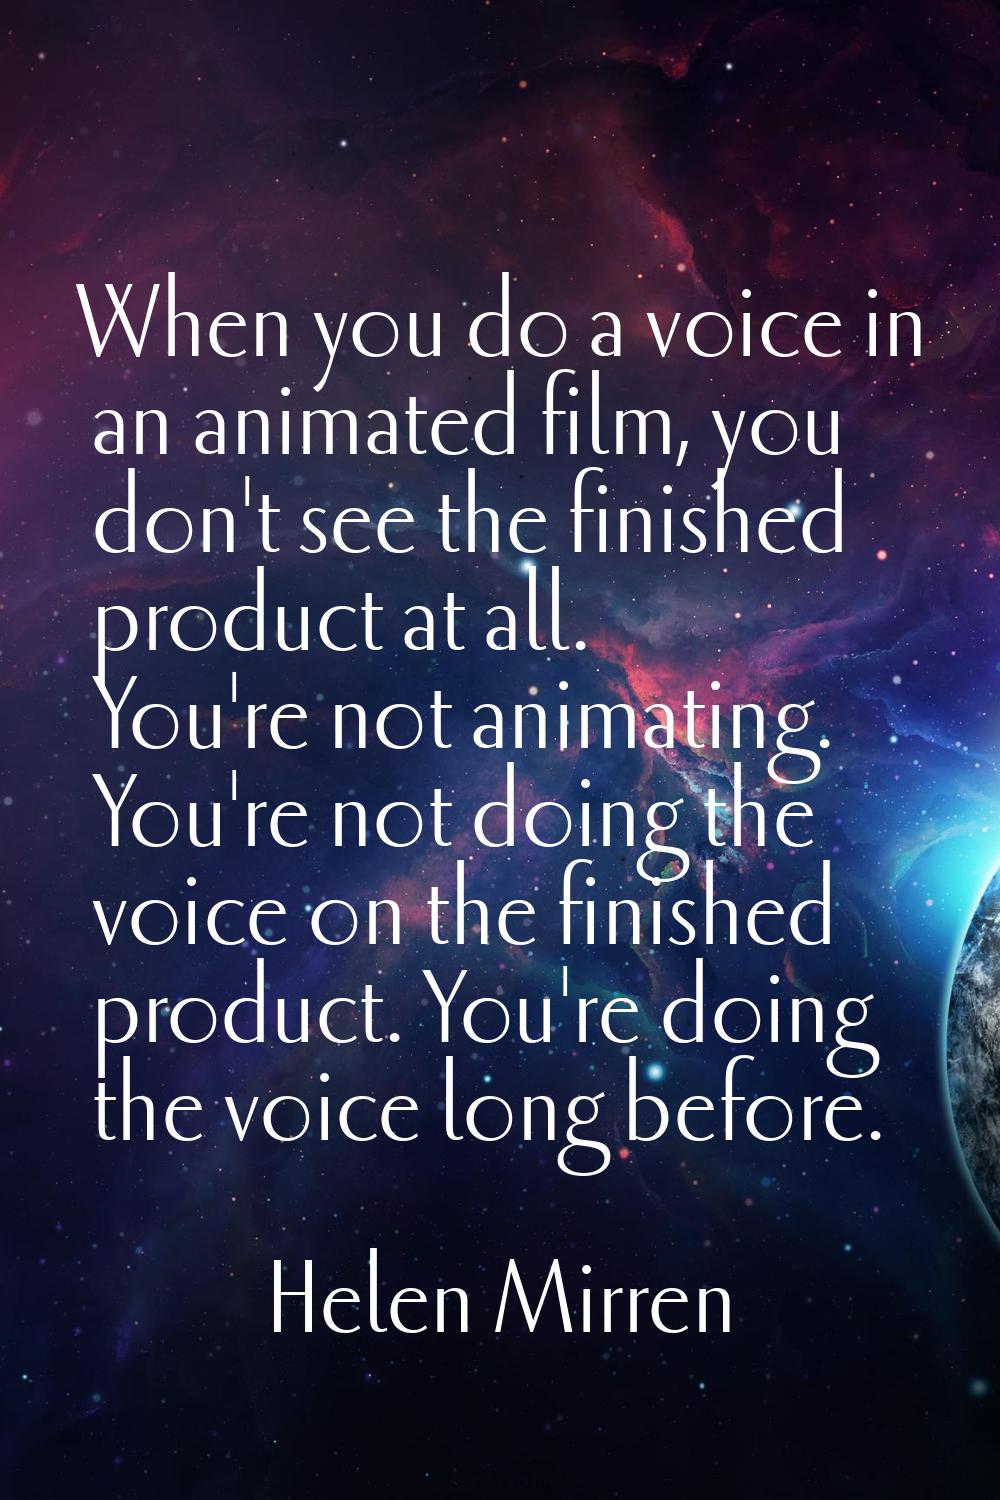 When you do a voice in an animated film, you don't see the finished product at all. You're not anim